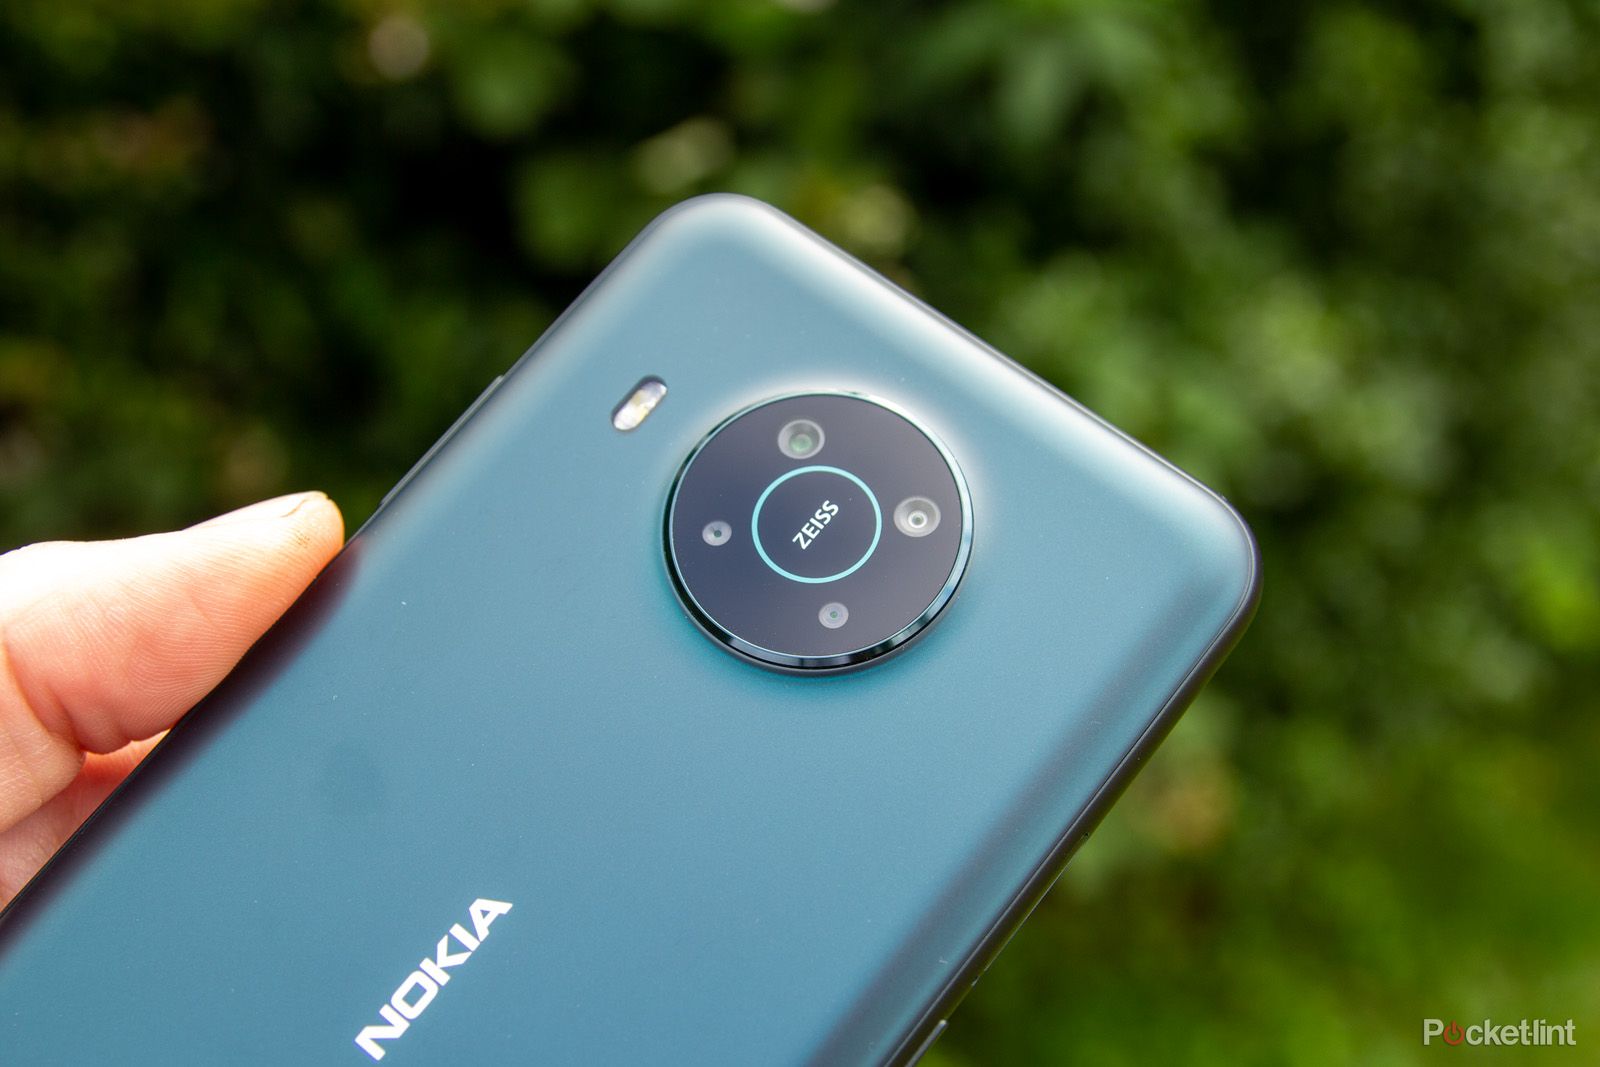 Nokia's next phone will launch on 27 July, could be the XR20 tough phone photo 1